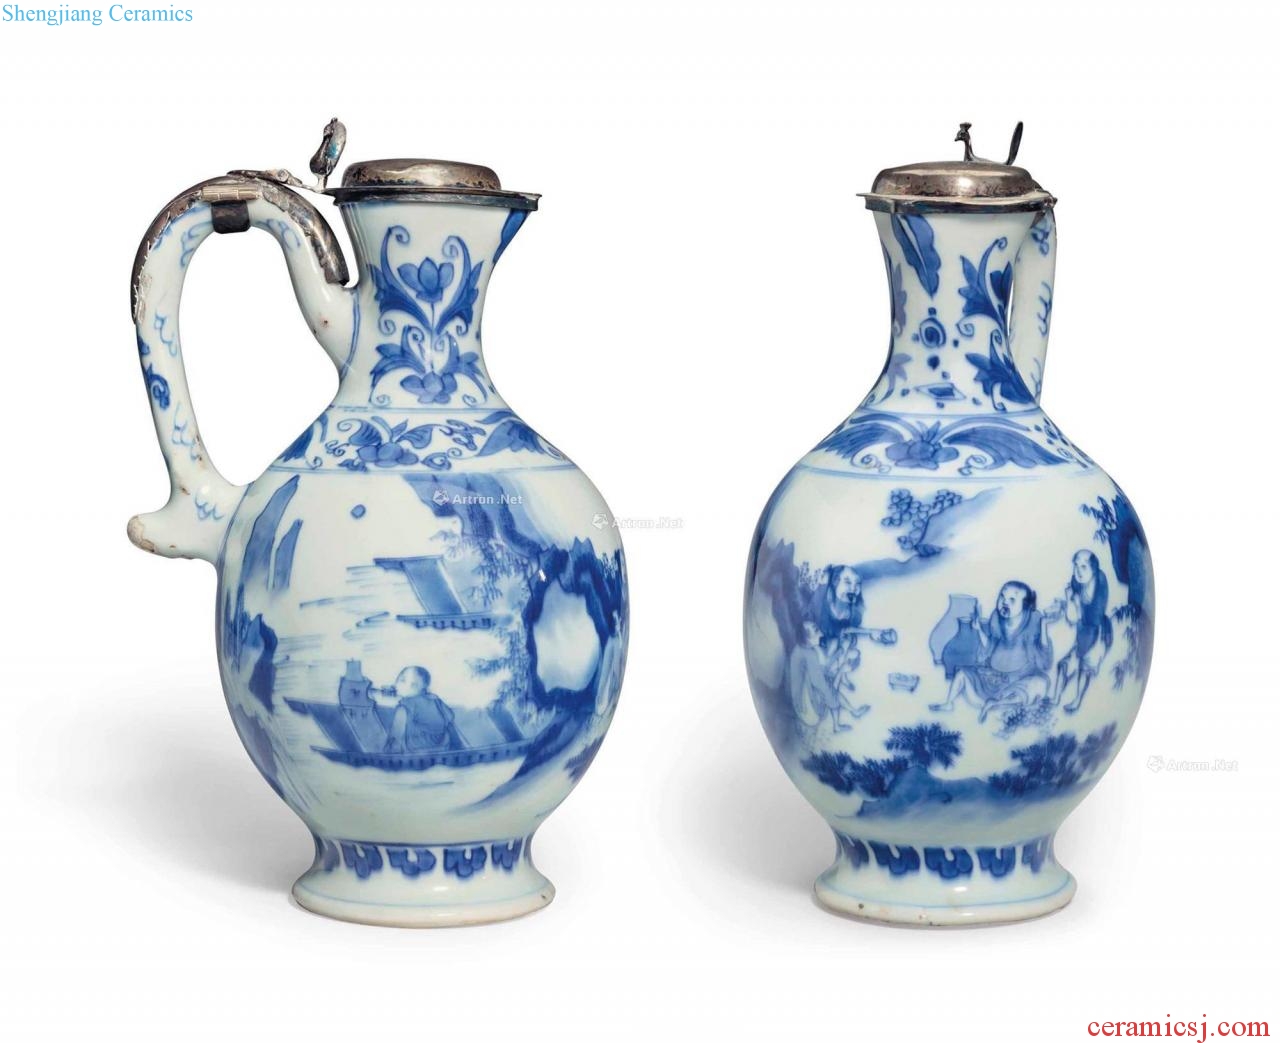 Chongzhen period (1628-1644), A BLUE AND WHITE EWER WITH SILVER MOUNTS